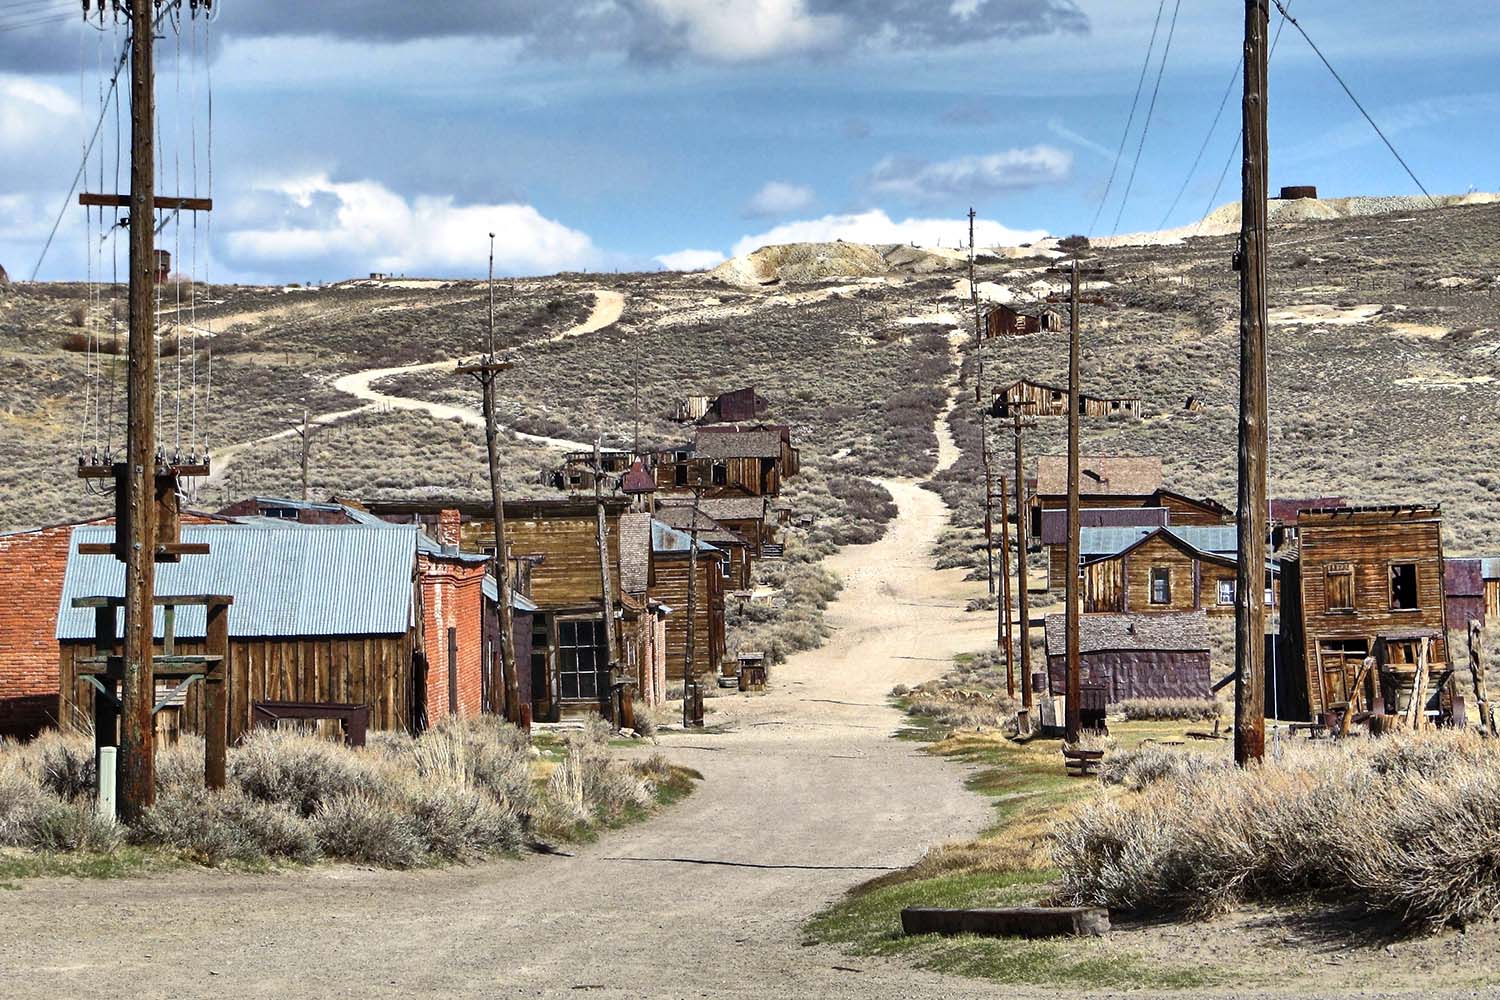 The ghost town of Bodie - California